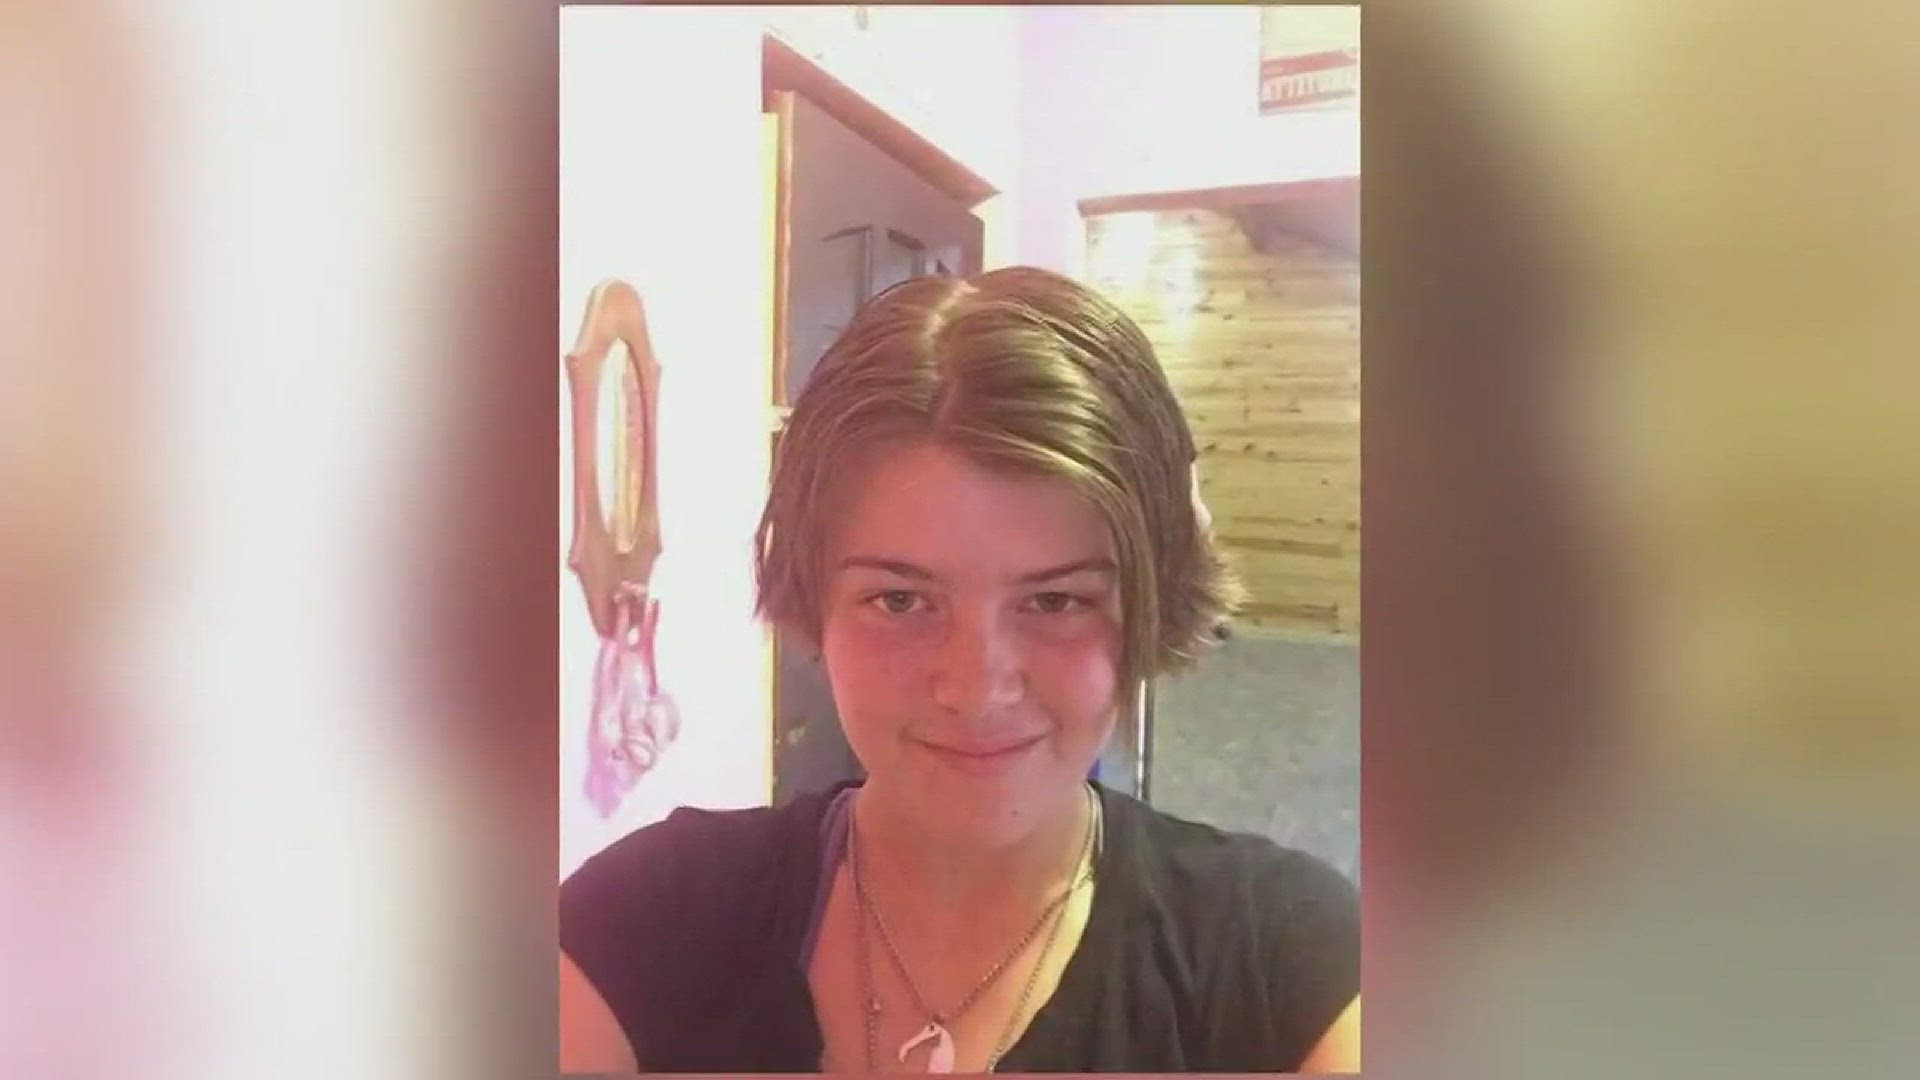 The Brewster County Sheriff's Office is looking for a teen missing out of the Alpine area.